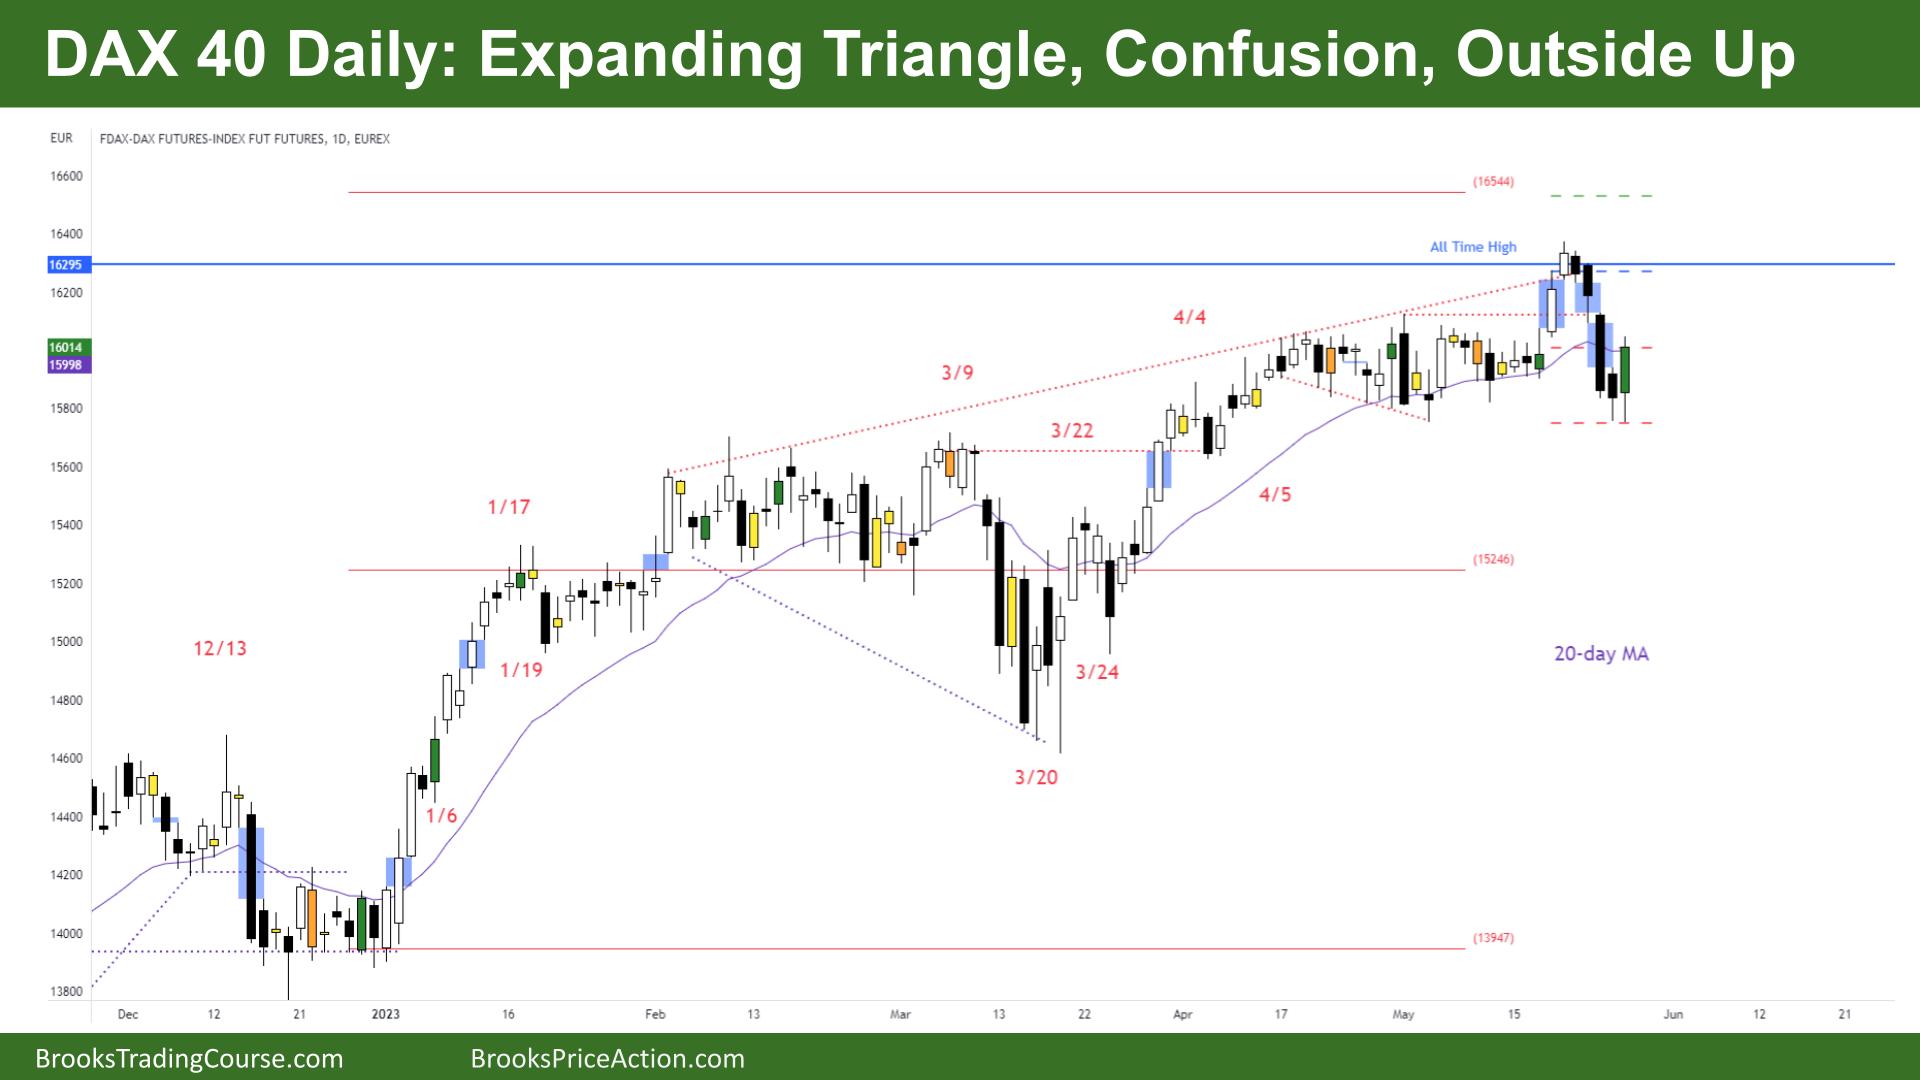 DAX 40 Expanding Triangle, Confusion, Outside Up